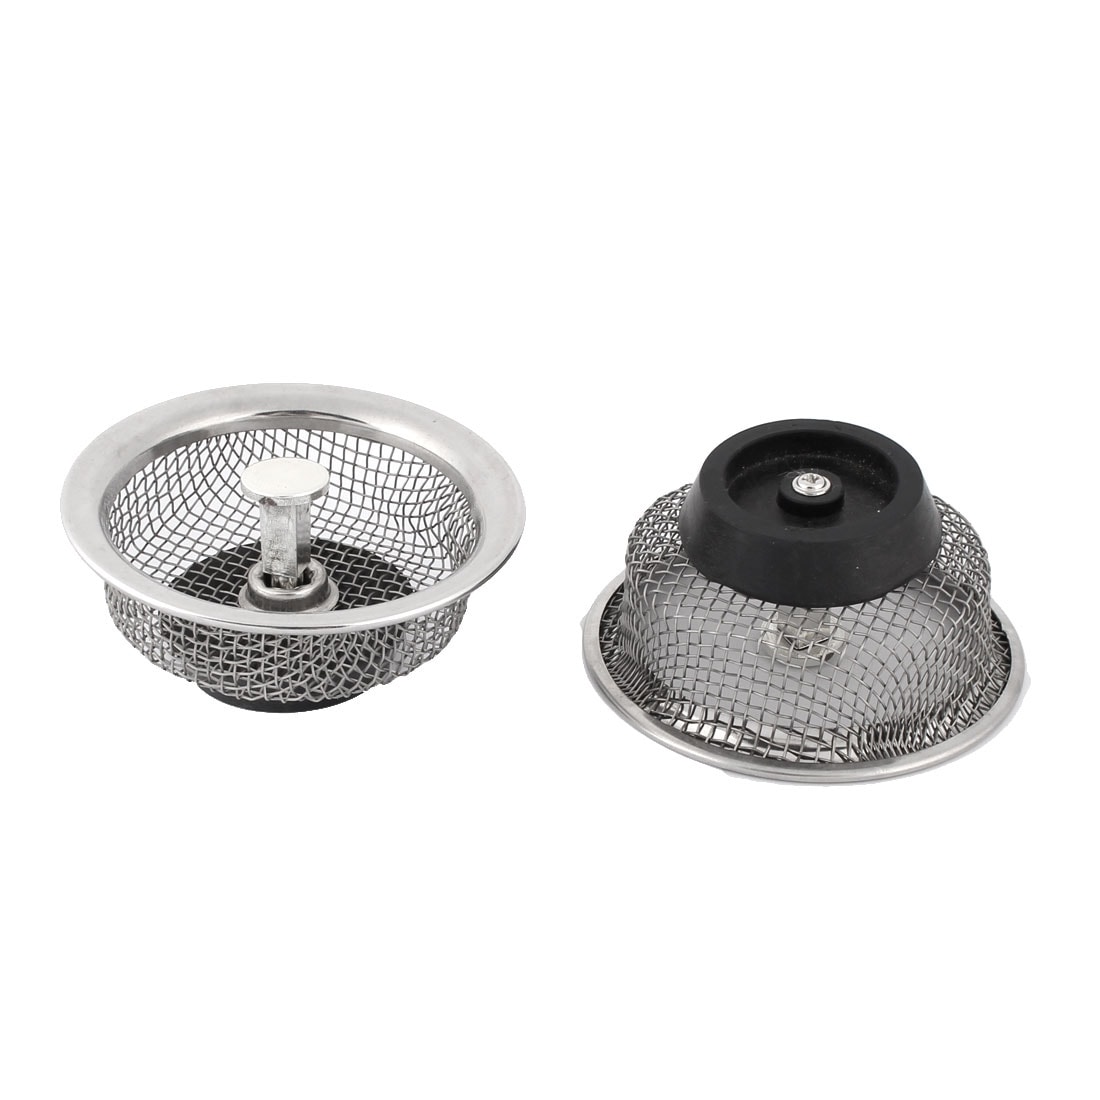 https://ak1.ostkcdn.com/images/products/is/images/direct/f846767173e656ea334b448d4a88e0ee3747a165/Stainless-Steel-Round-Shape-Mesh-Screen-Sink-Strainer-8.5cm-Dia-2Pcs.jpg